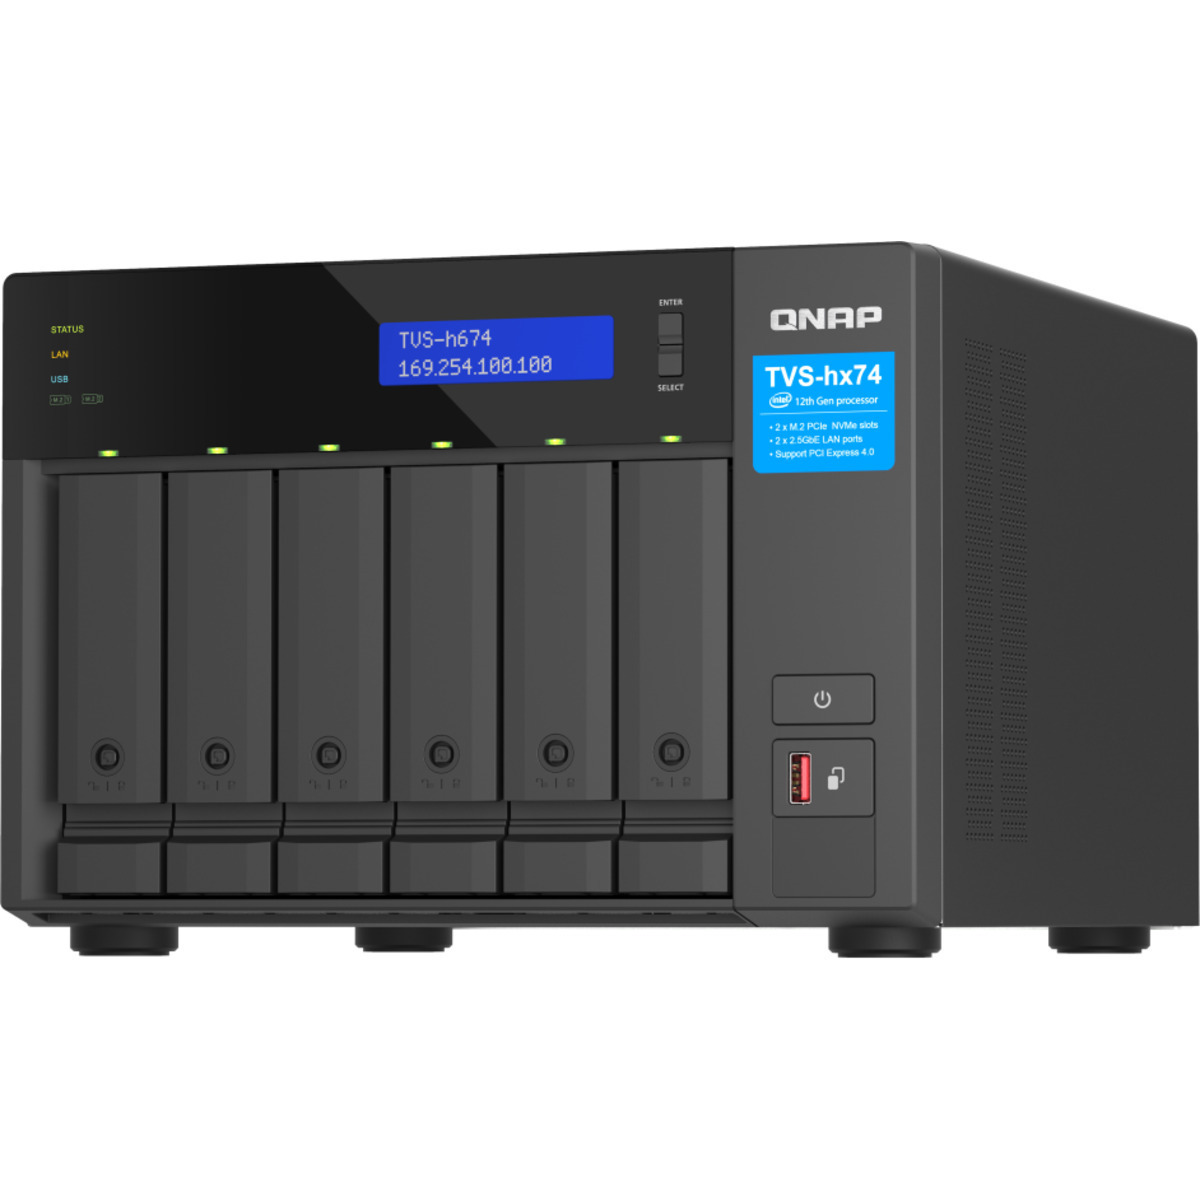 QNAP TVS-h674 Core i3 6tb 6-Bay Desktop Multimedia / Power User / Business NAS - Network Attached Storage Device 6x1tb Western Digital Red SA500 WDS100T1R0A 2.5 560/530MB/s SATA 6Gb/s SSD NAS Class Drives Installed - Burn-In Tested TVS-h674 Core i3